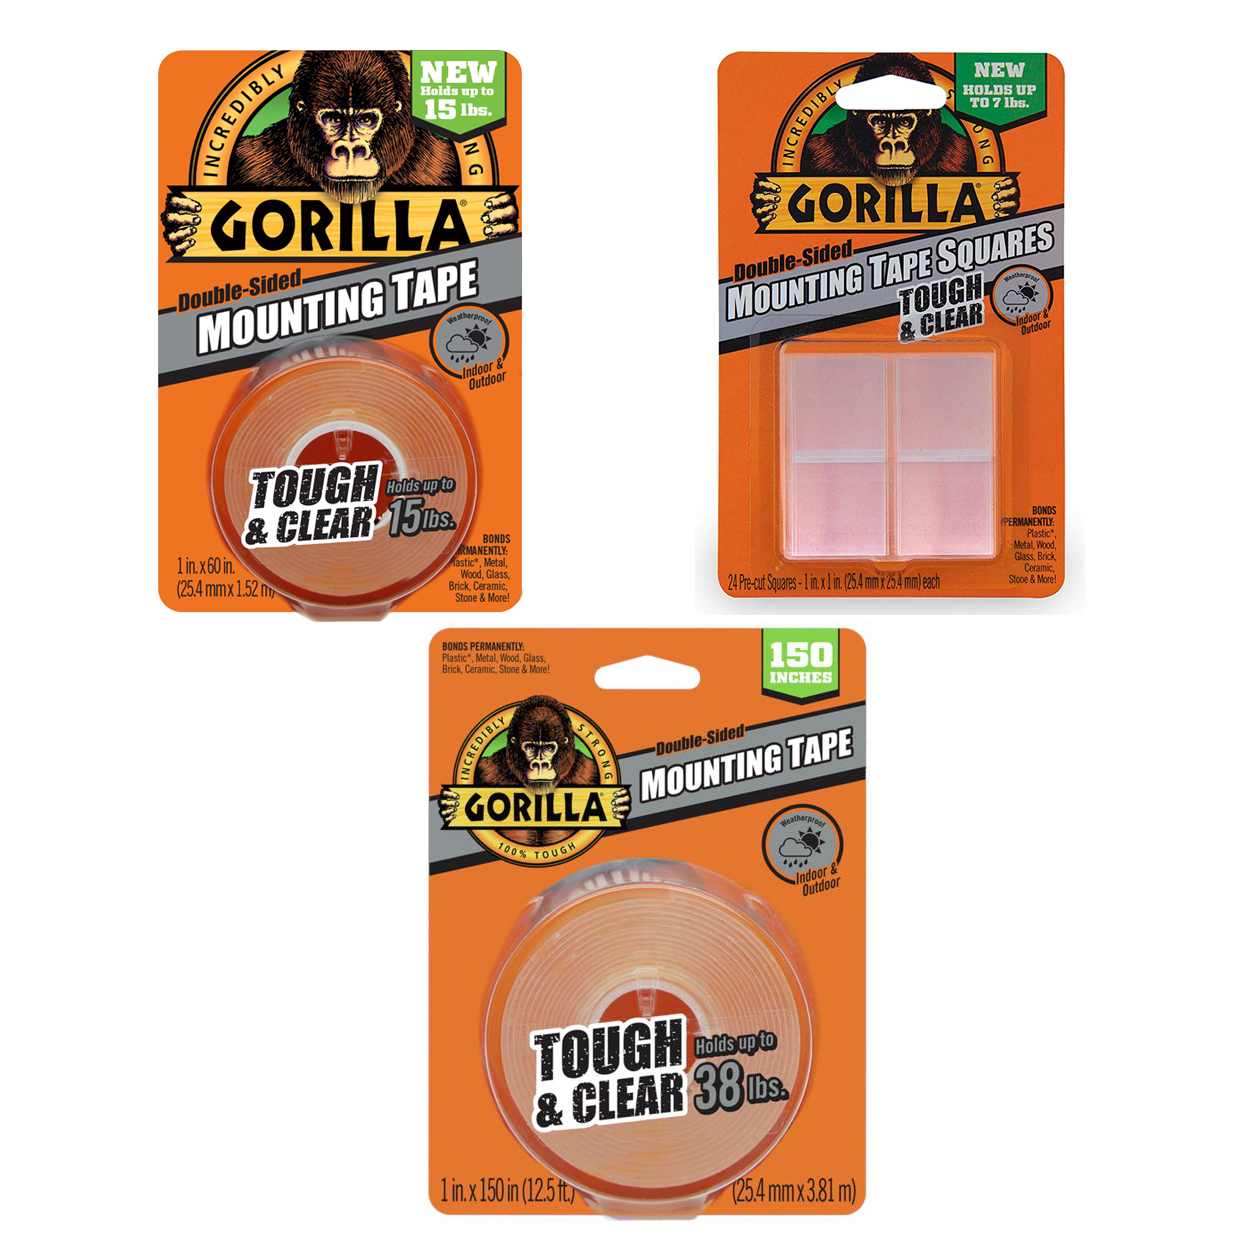 1 x 150 Pack of 1 Gorilla Tough & Clear Double Sided XL Mounting Tape Clear, - 1 